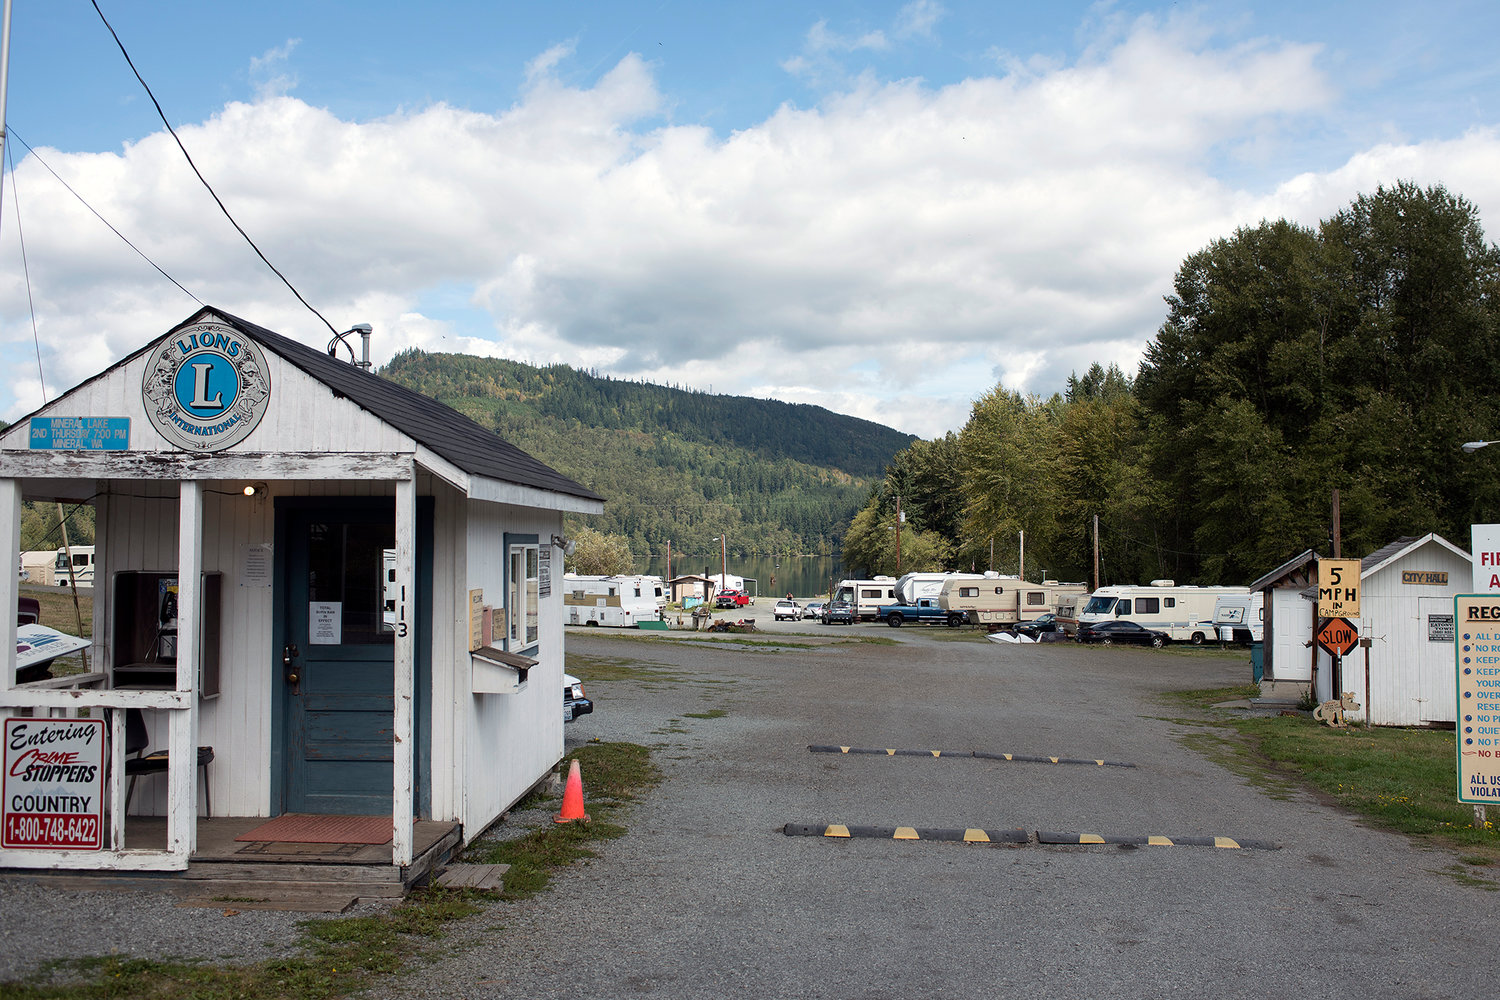 The Lion's Den Campground at Mineral Lake is pictured in this file photo.